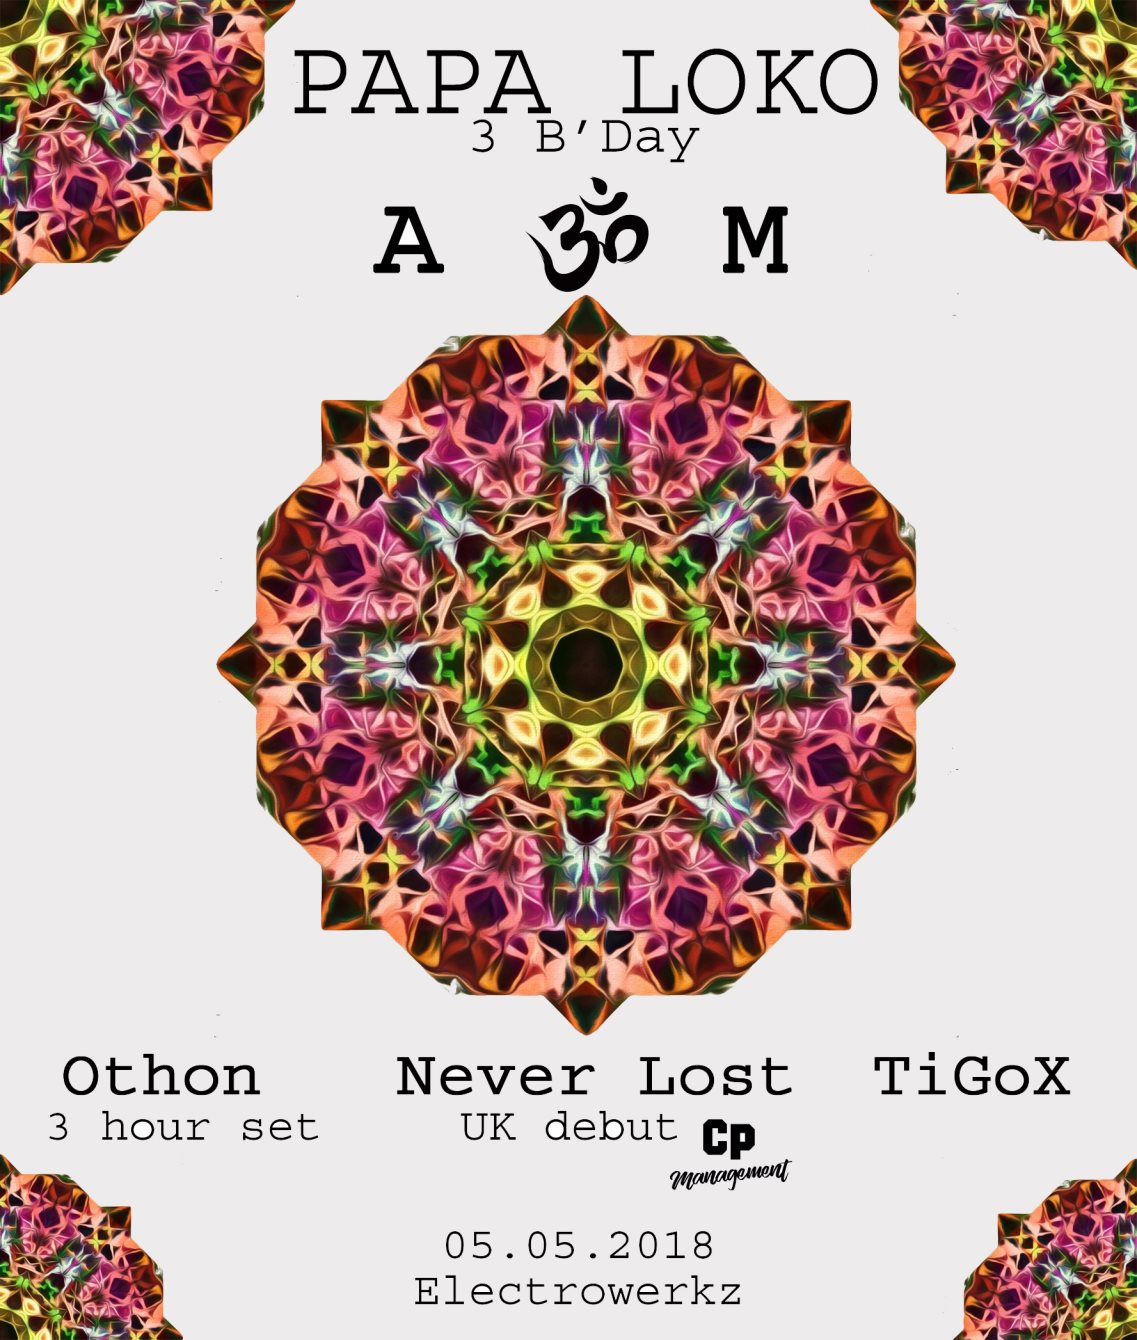 Papa Loko 3rd Birthday: A U M with Never Lost (UK Debut) Othon (3 Hour Set) & Tigox - Flyer front